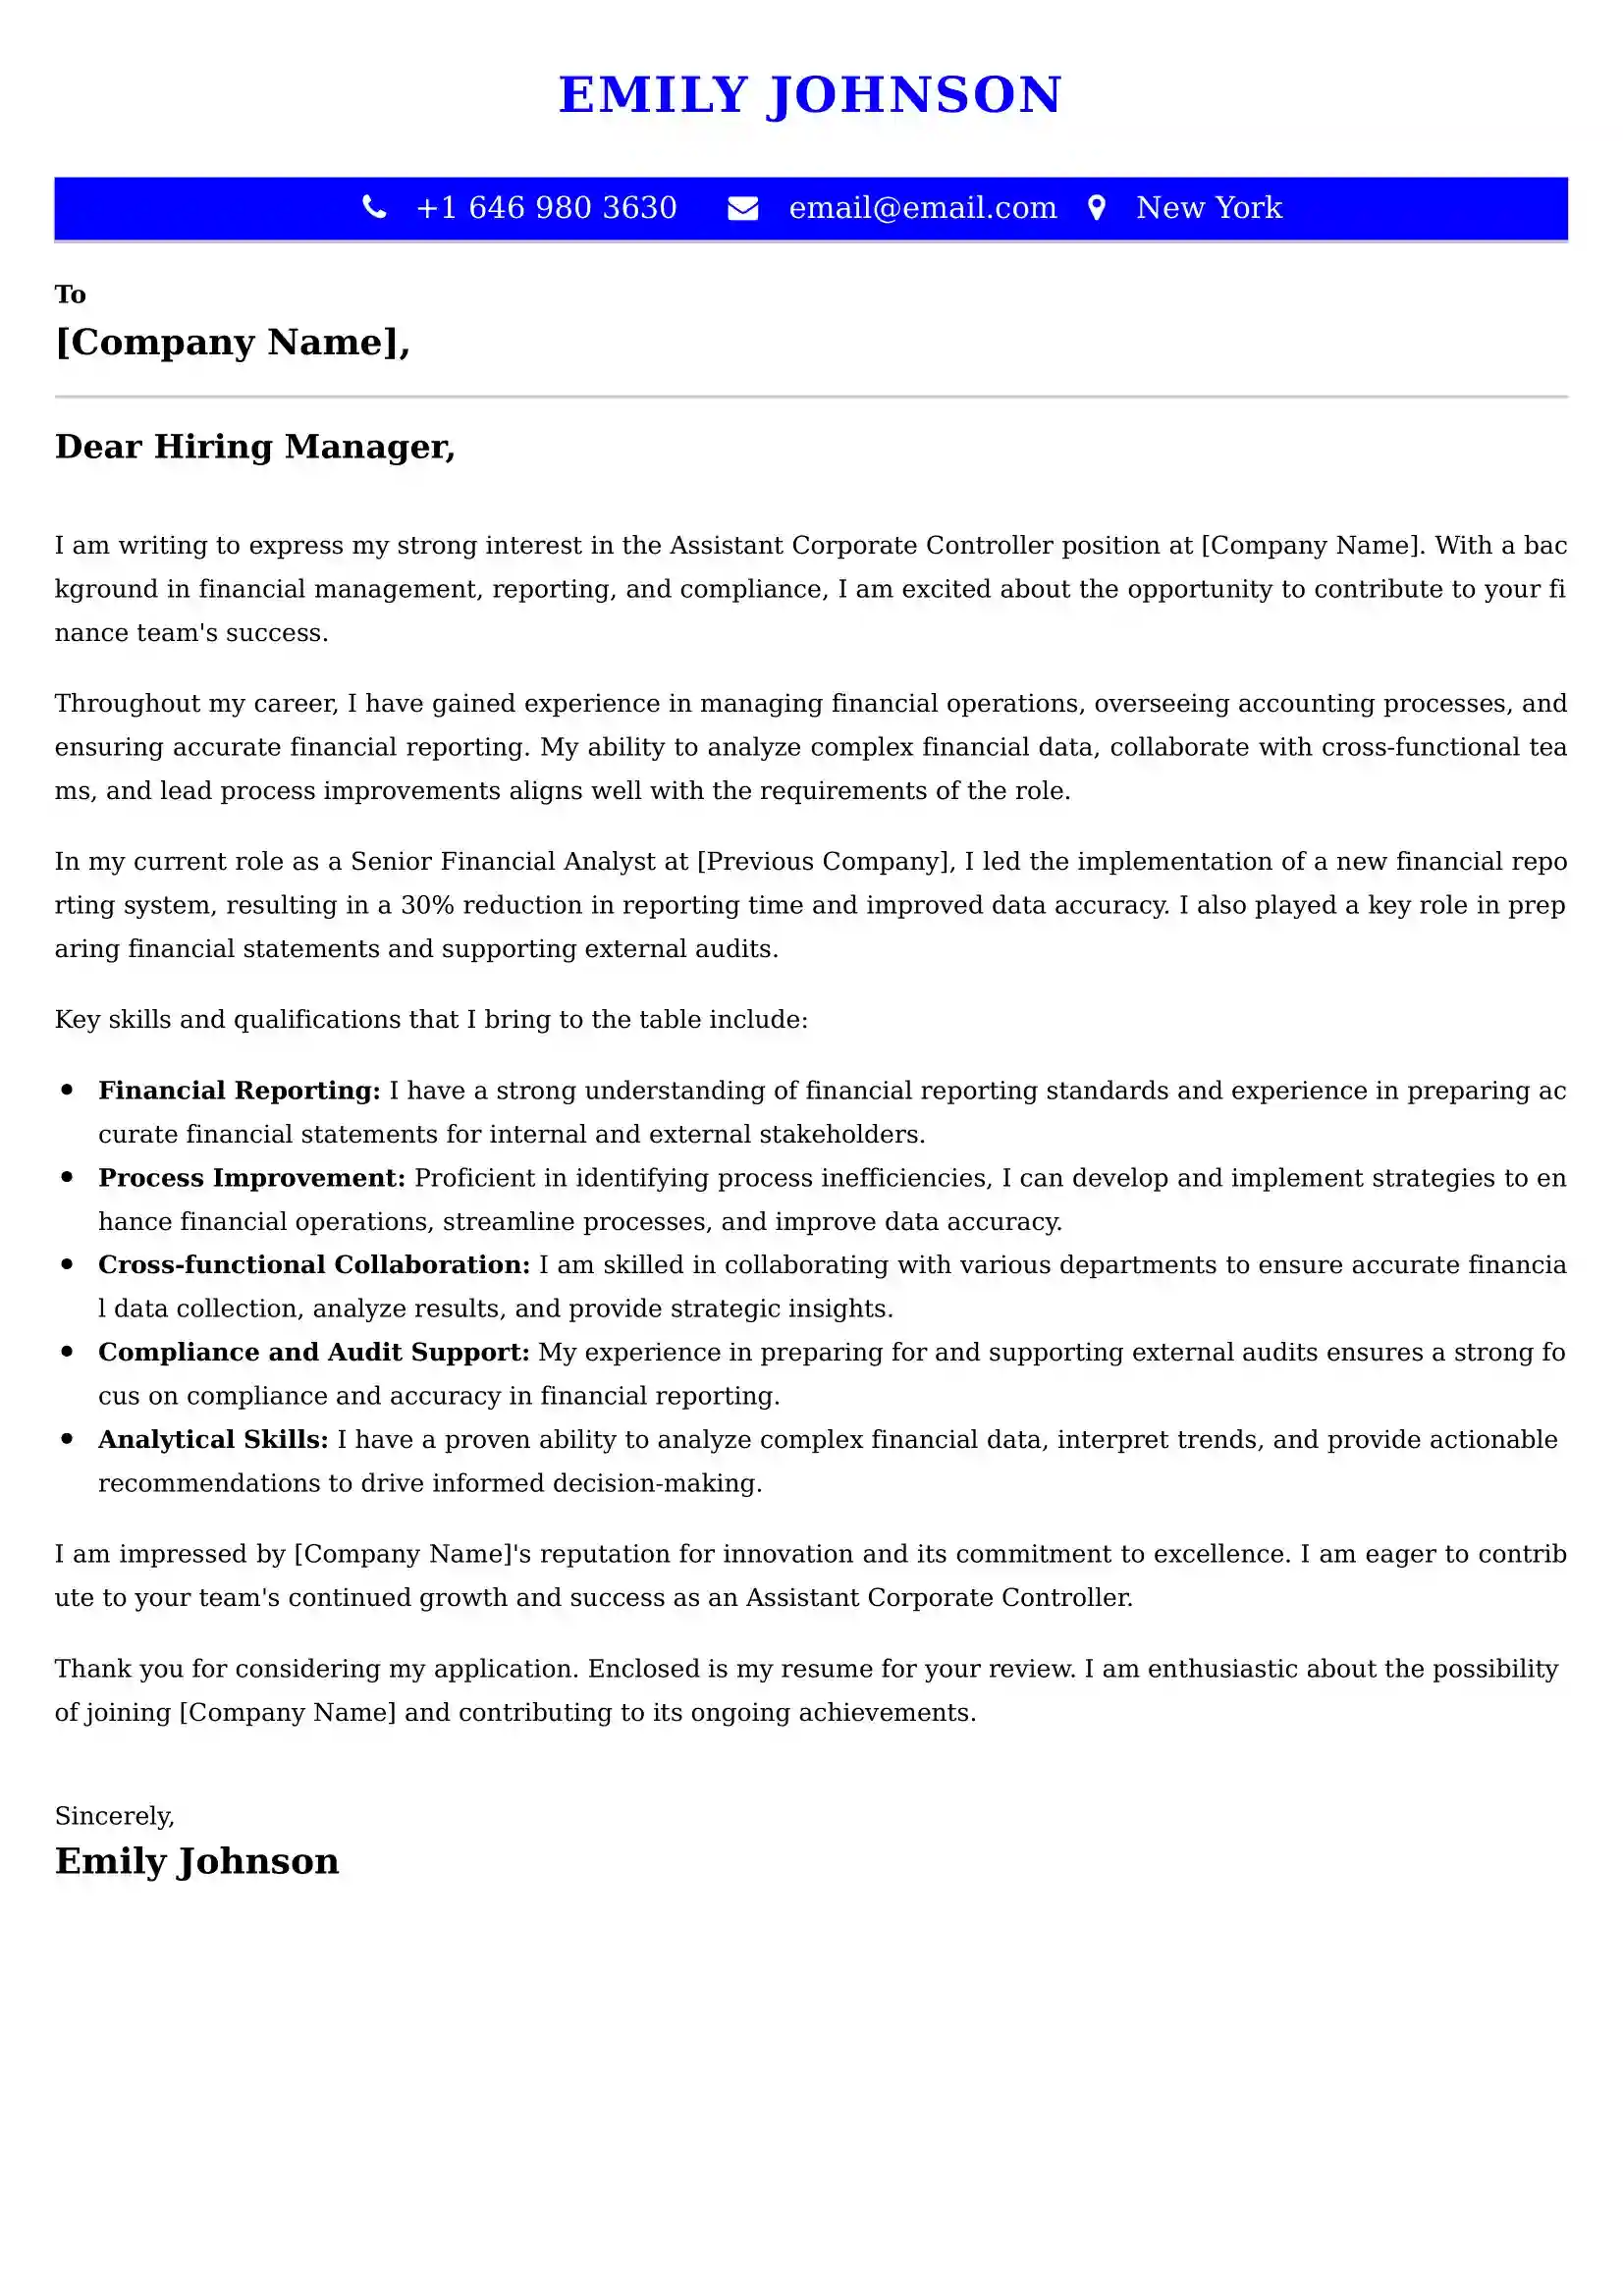 Assistant Corporate Controller Cover Letter Examples -Latest Brazilian Templates